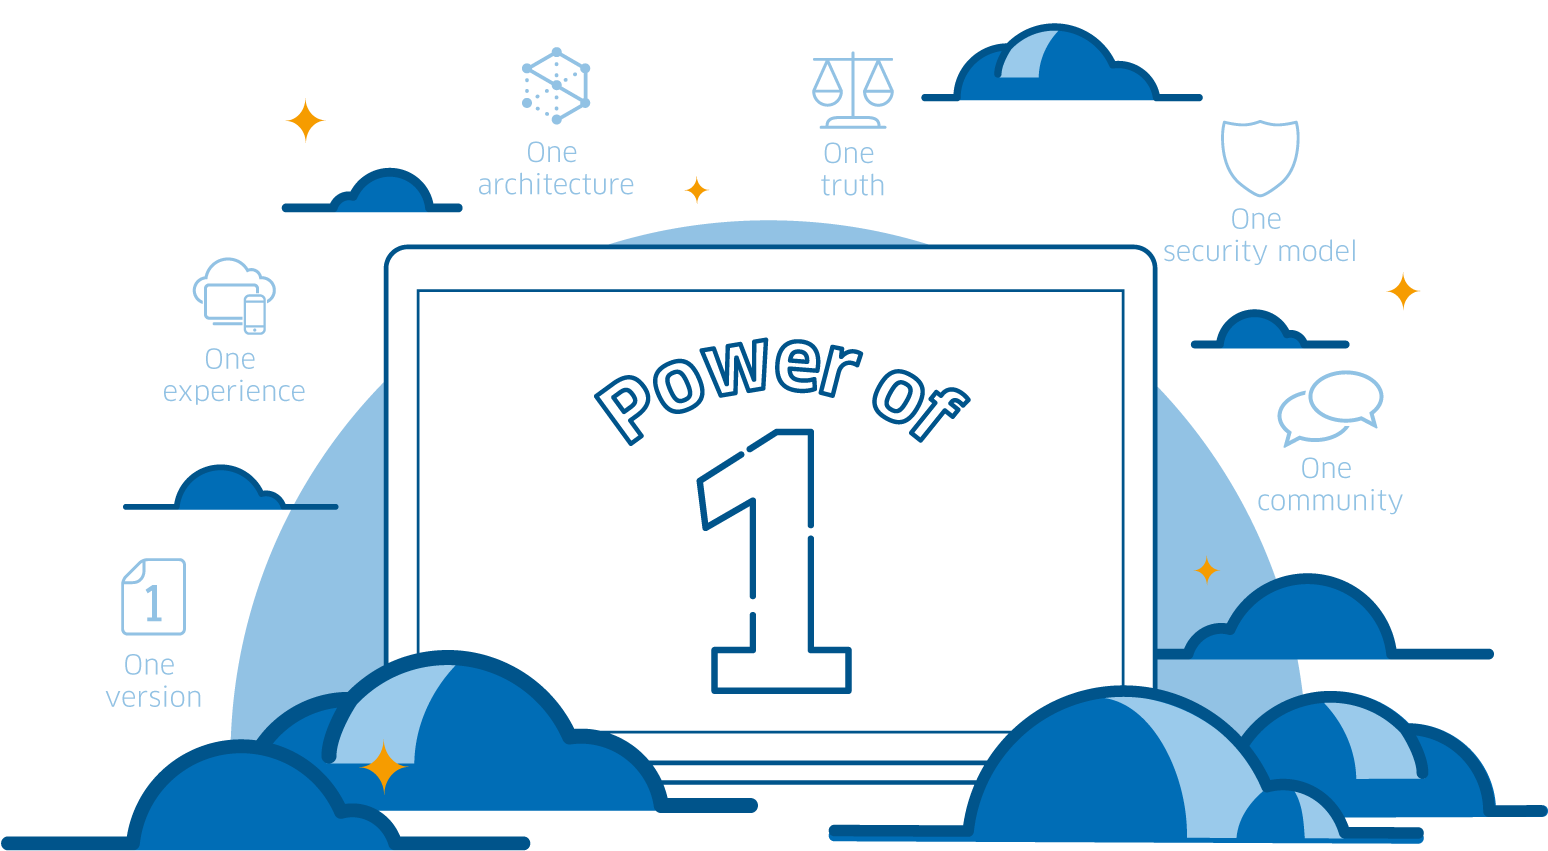 Security Is At The Heart Of Our Business - Workday Power Of One (2280x1336)